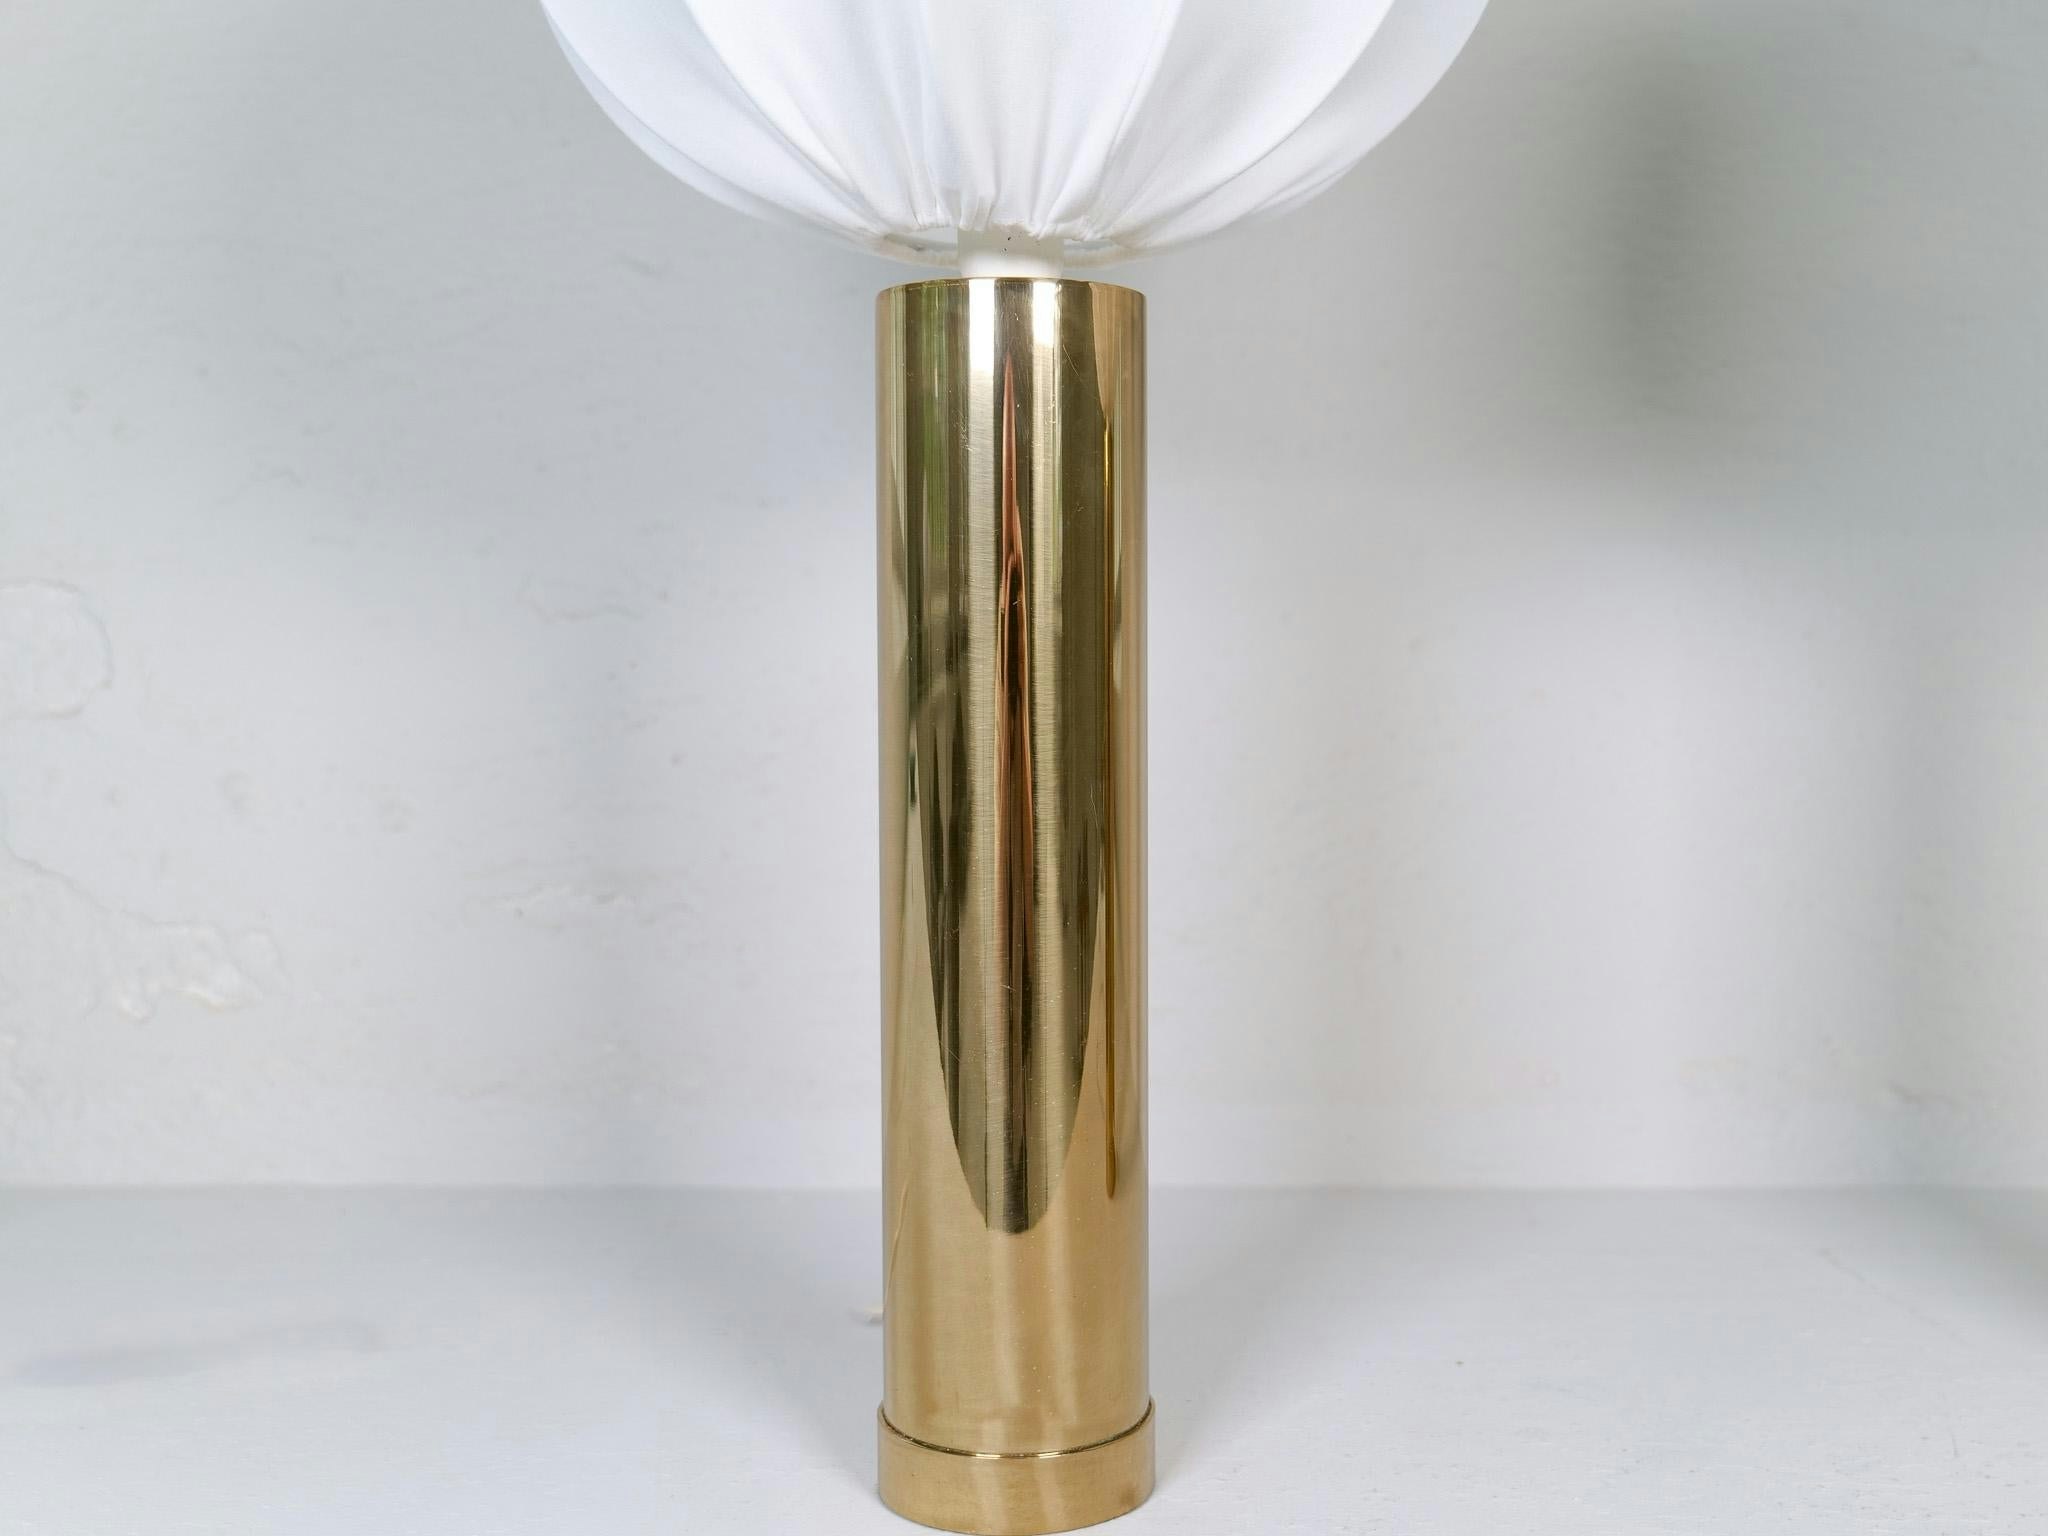 Midcentury Pair of Large Brass Bergboms B-010 Table Lamps, 1960s, Sweden